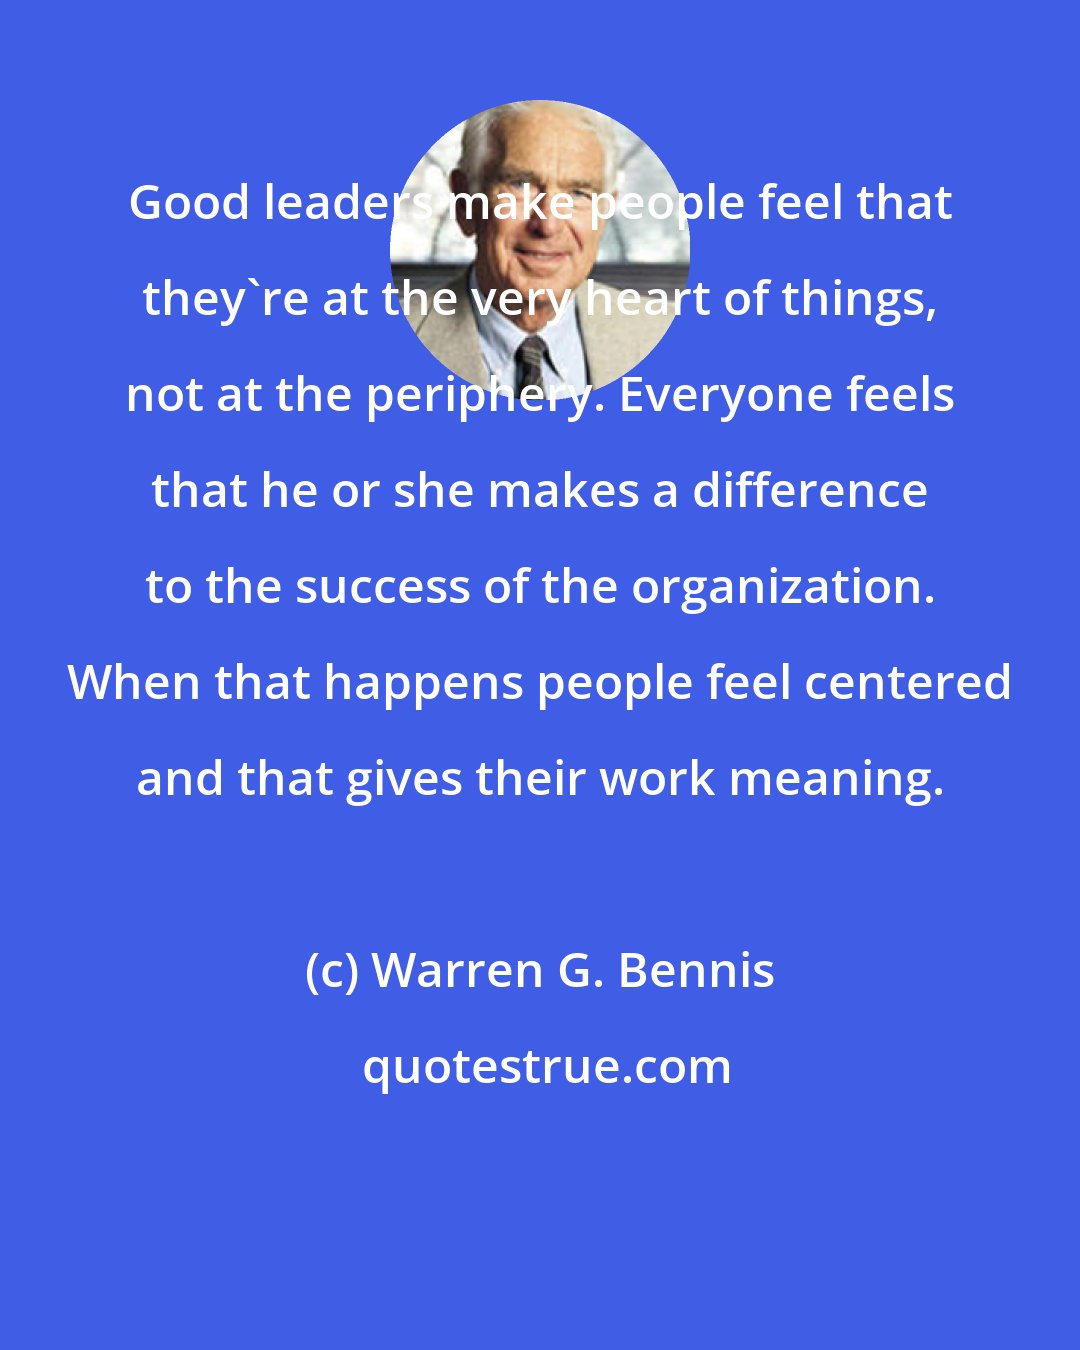 Warren G. Bennis: Good leaders make people feel that they're at the very heart of things, not at the periphery. Everyone feels that he or she makes a difference to the success of the organization. When that happens people feel centered and that gives their work meaning.